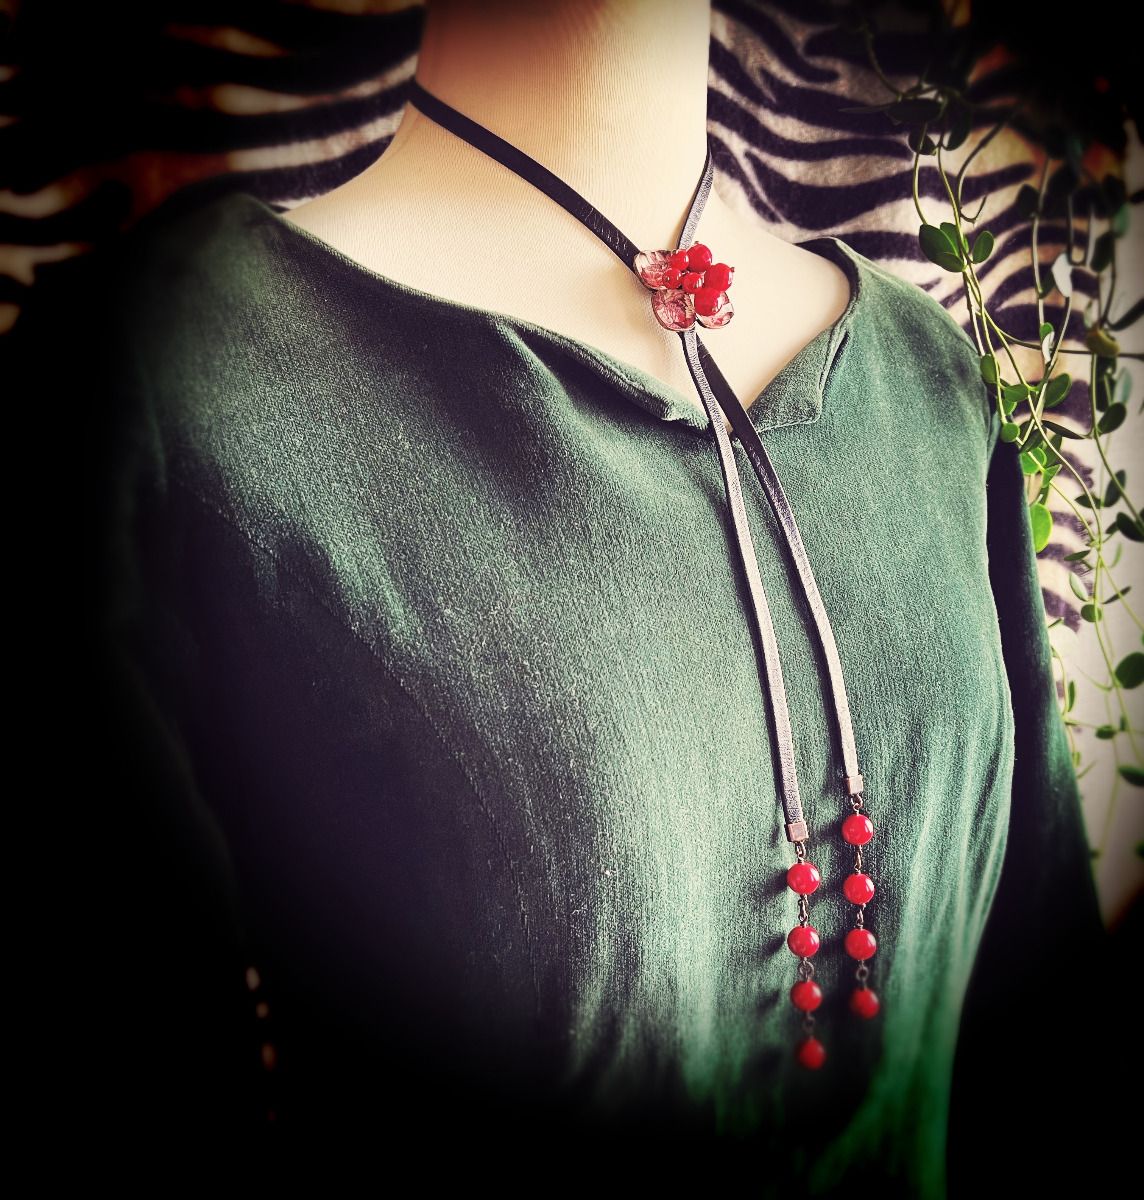 Leather Straps Bolo Tie Red Lily Coral Flower TAMARUSAN